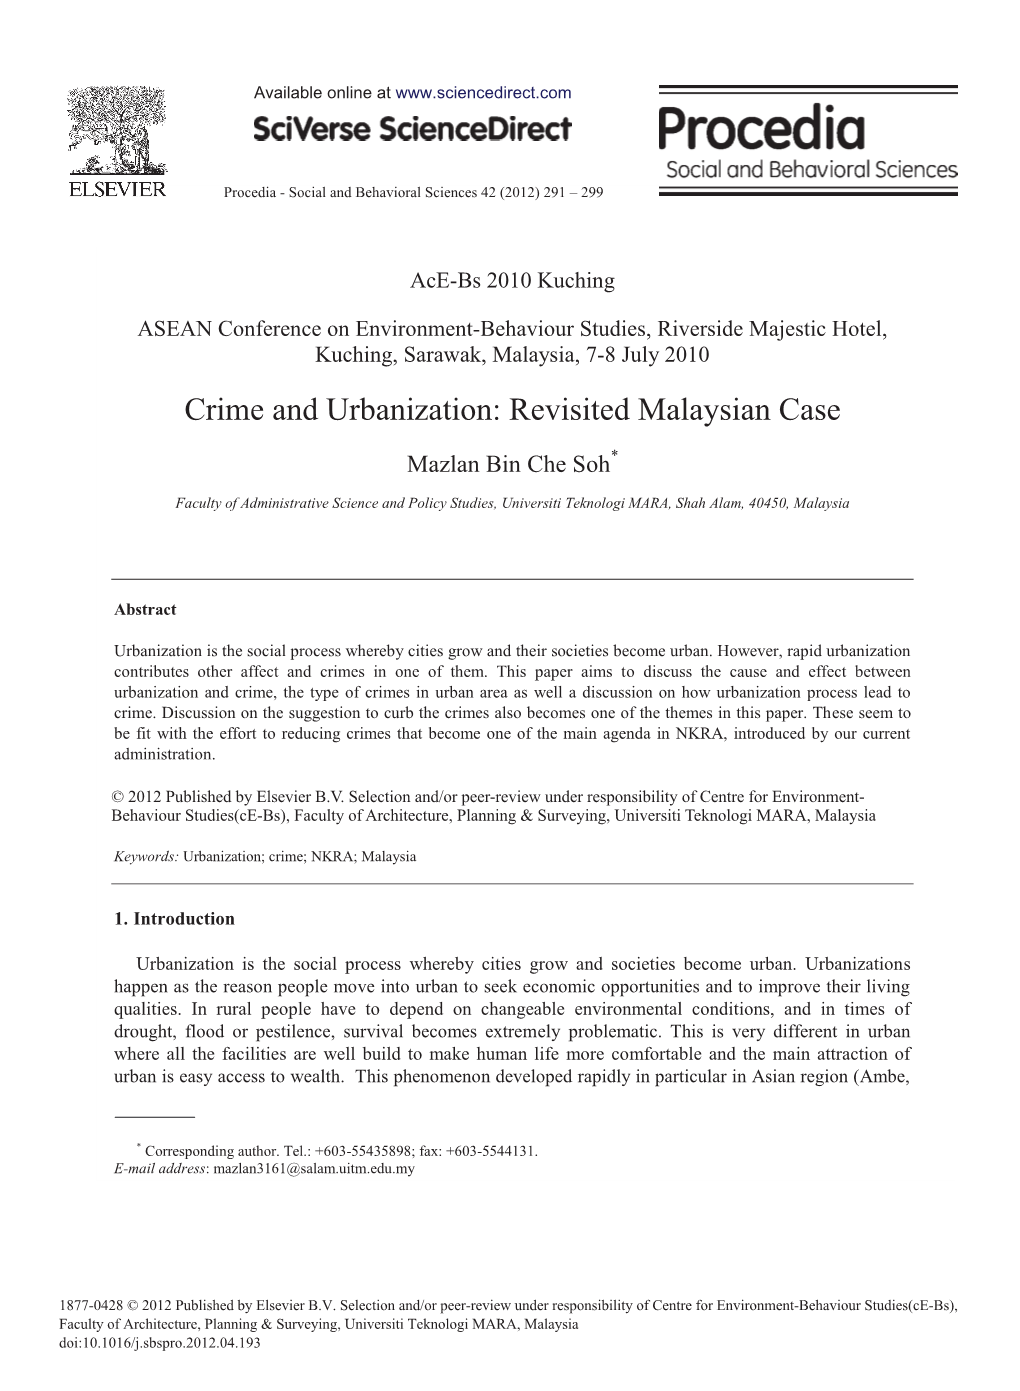 Crime and Urbanization: Revisited Malaysian Case